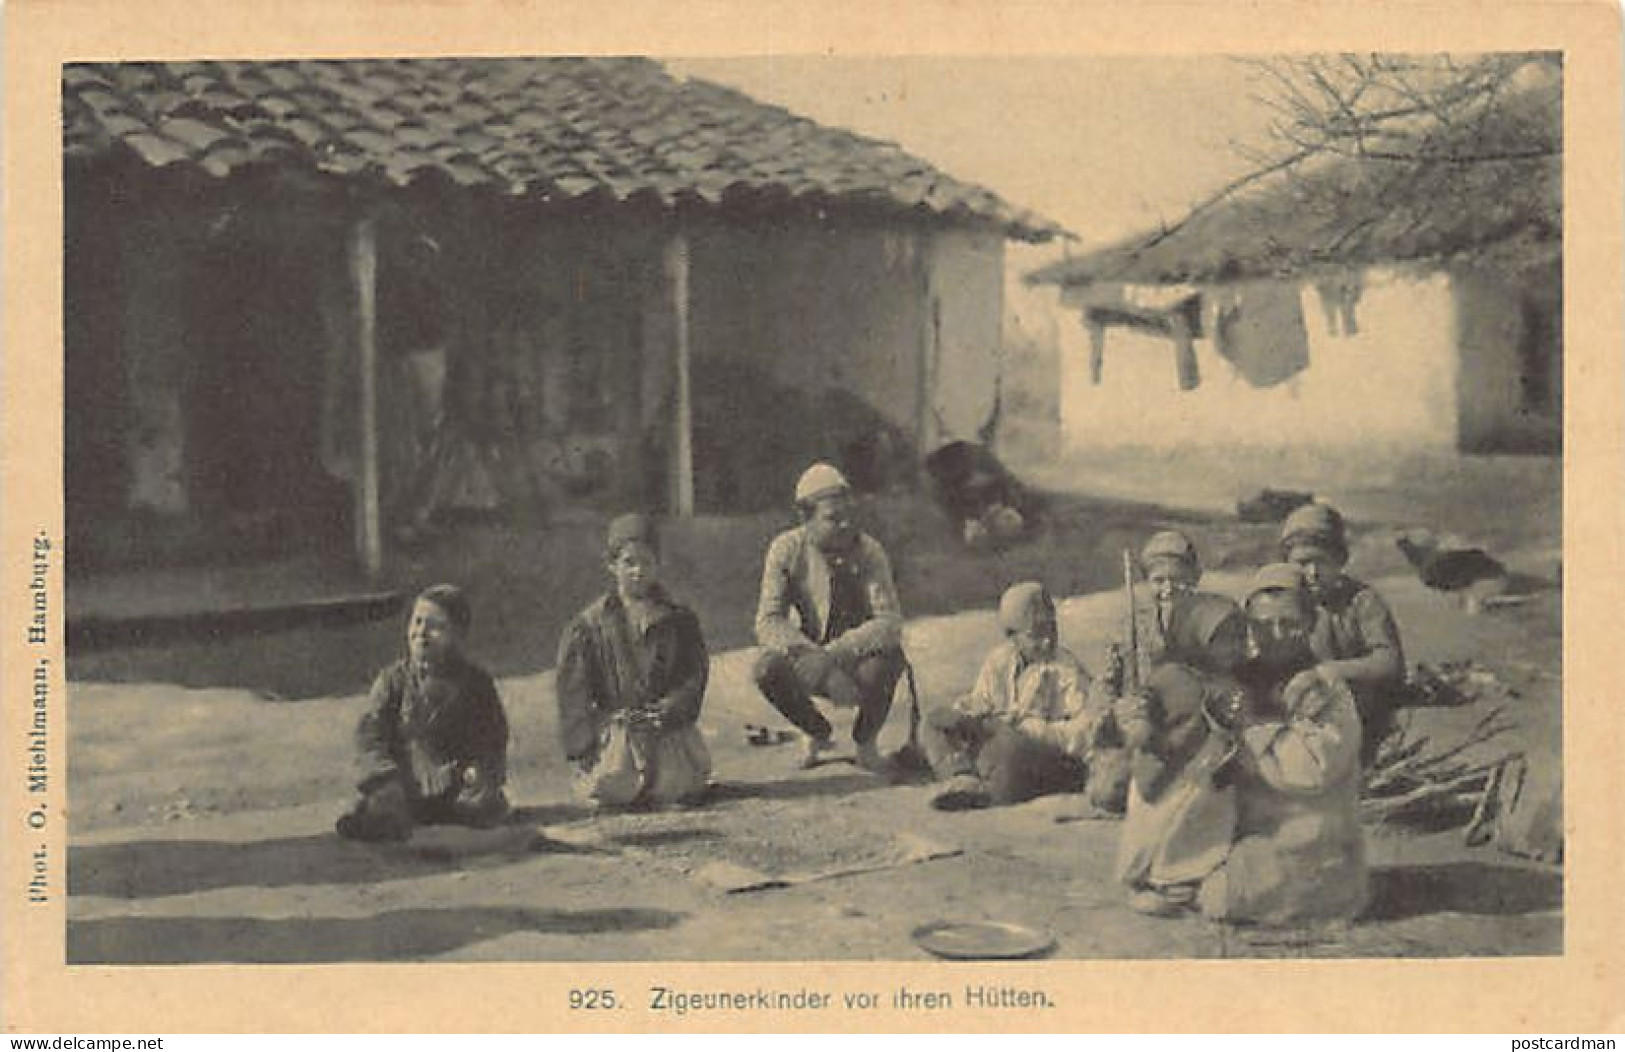 Macedonia - Gypsy Children In Front Of Their Huts - Macédoine Du Nord